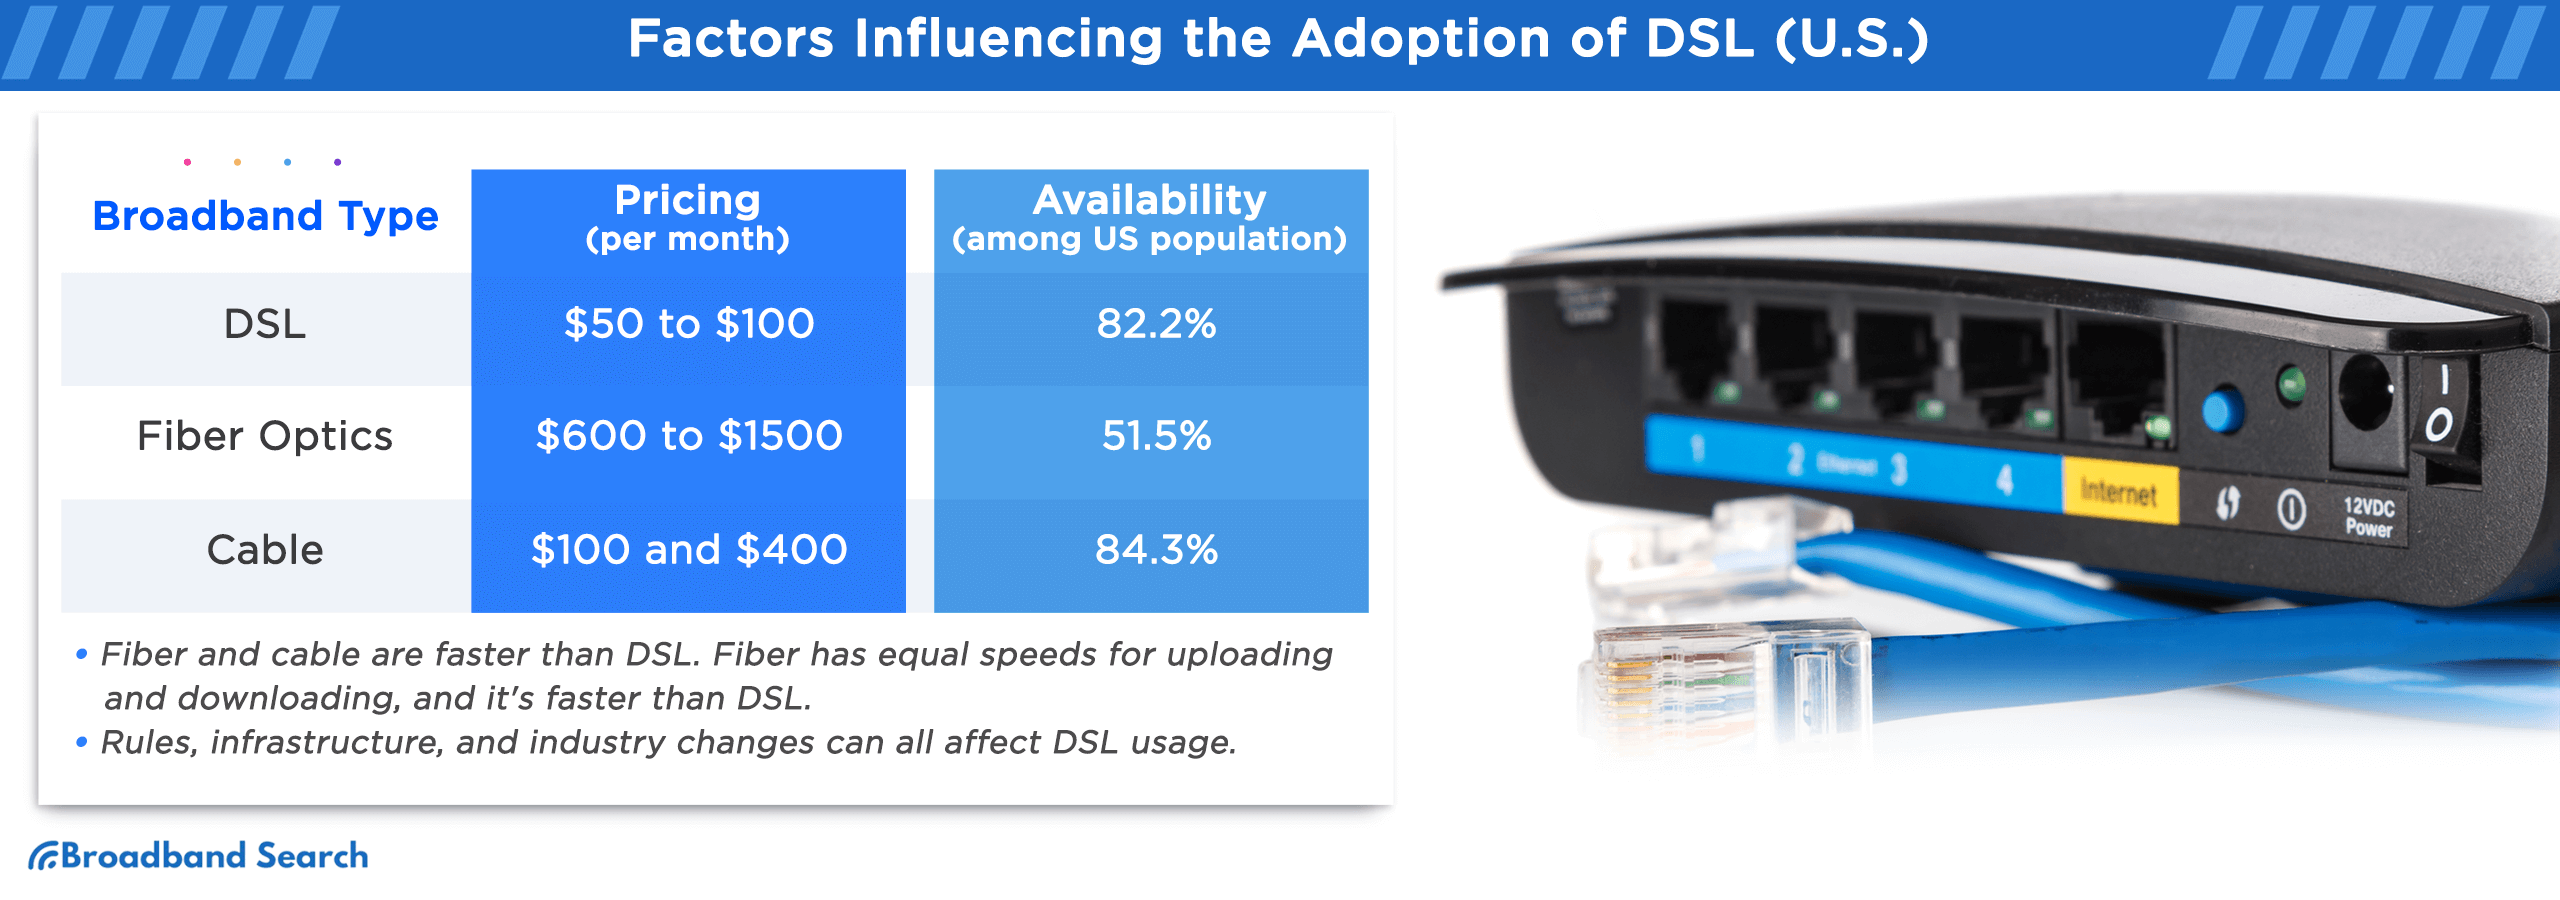 Factors influencing the adoption of dsl in the united states